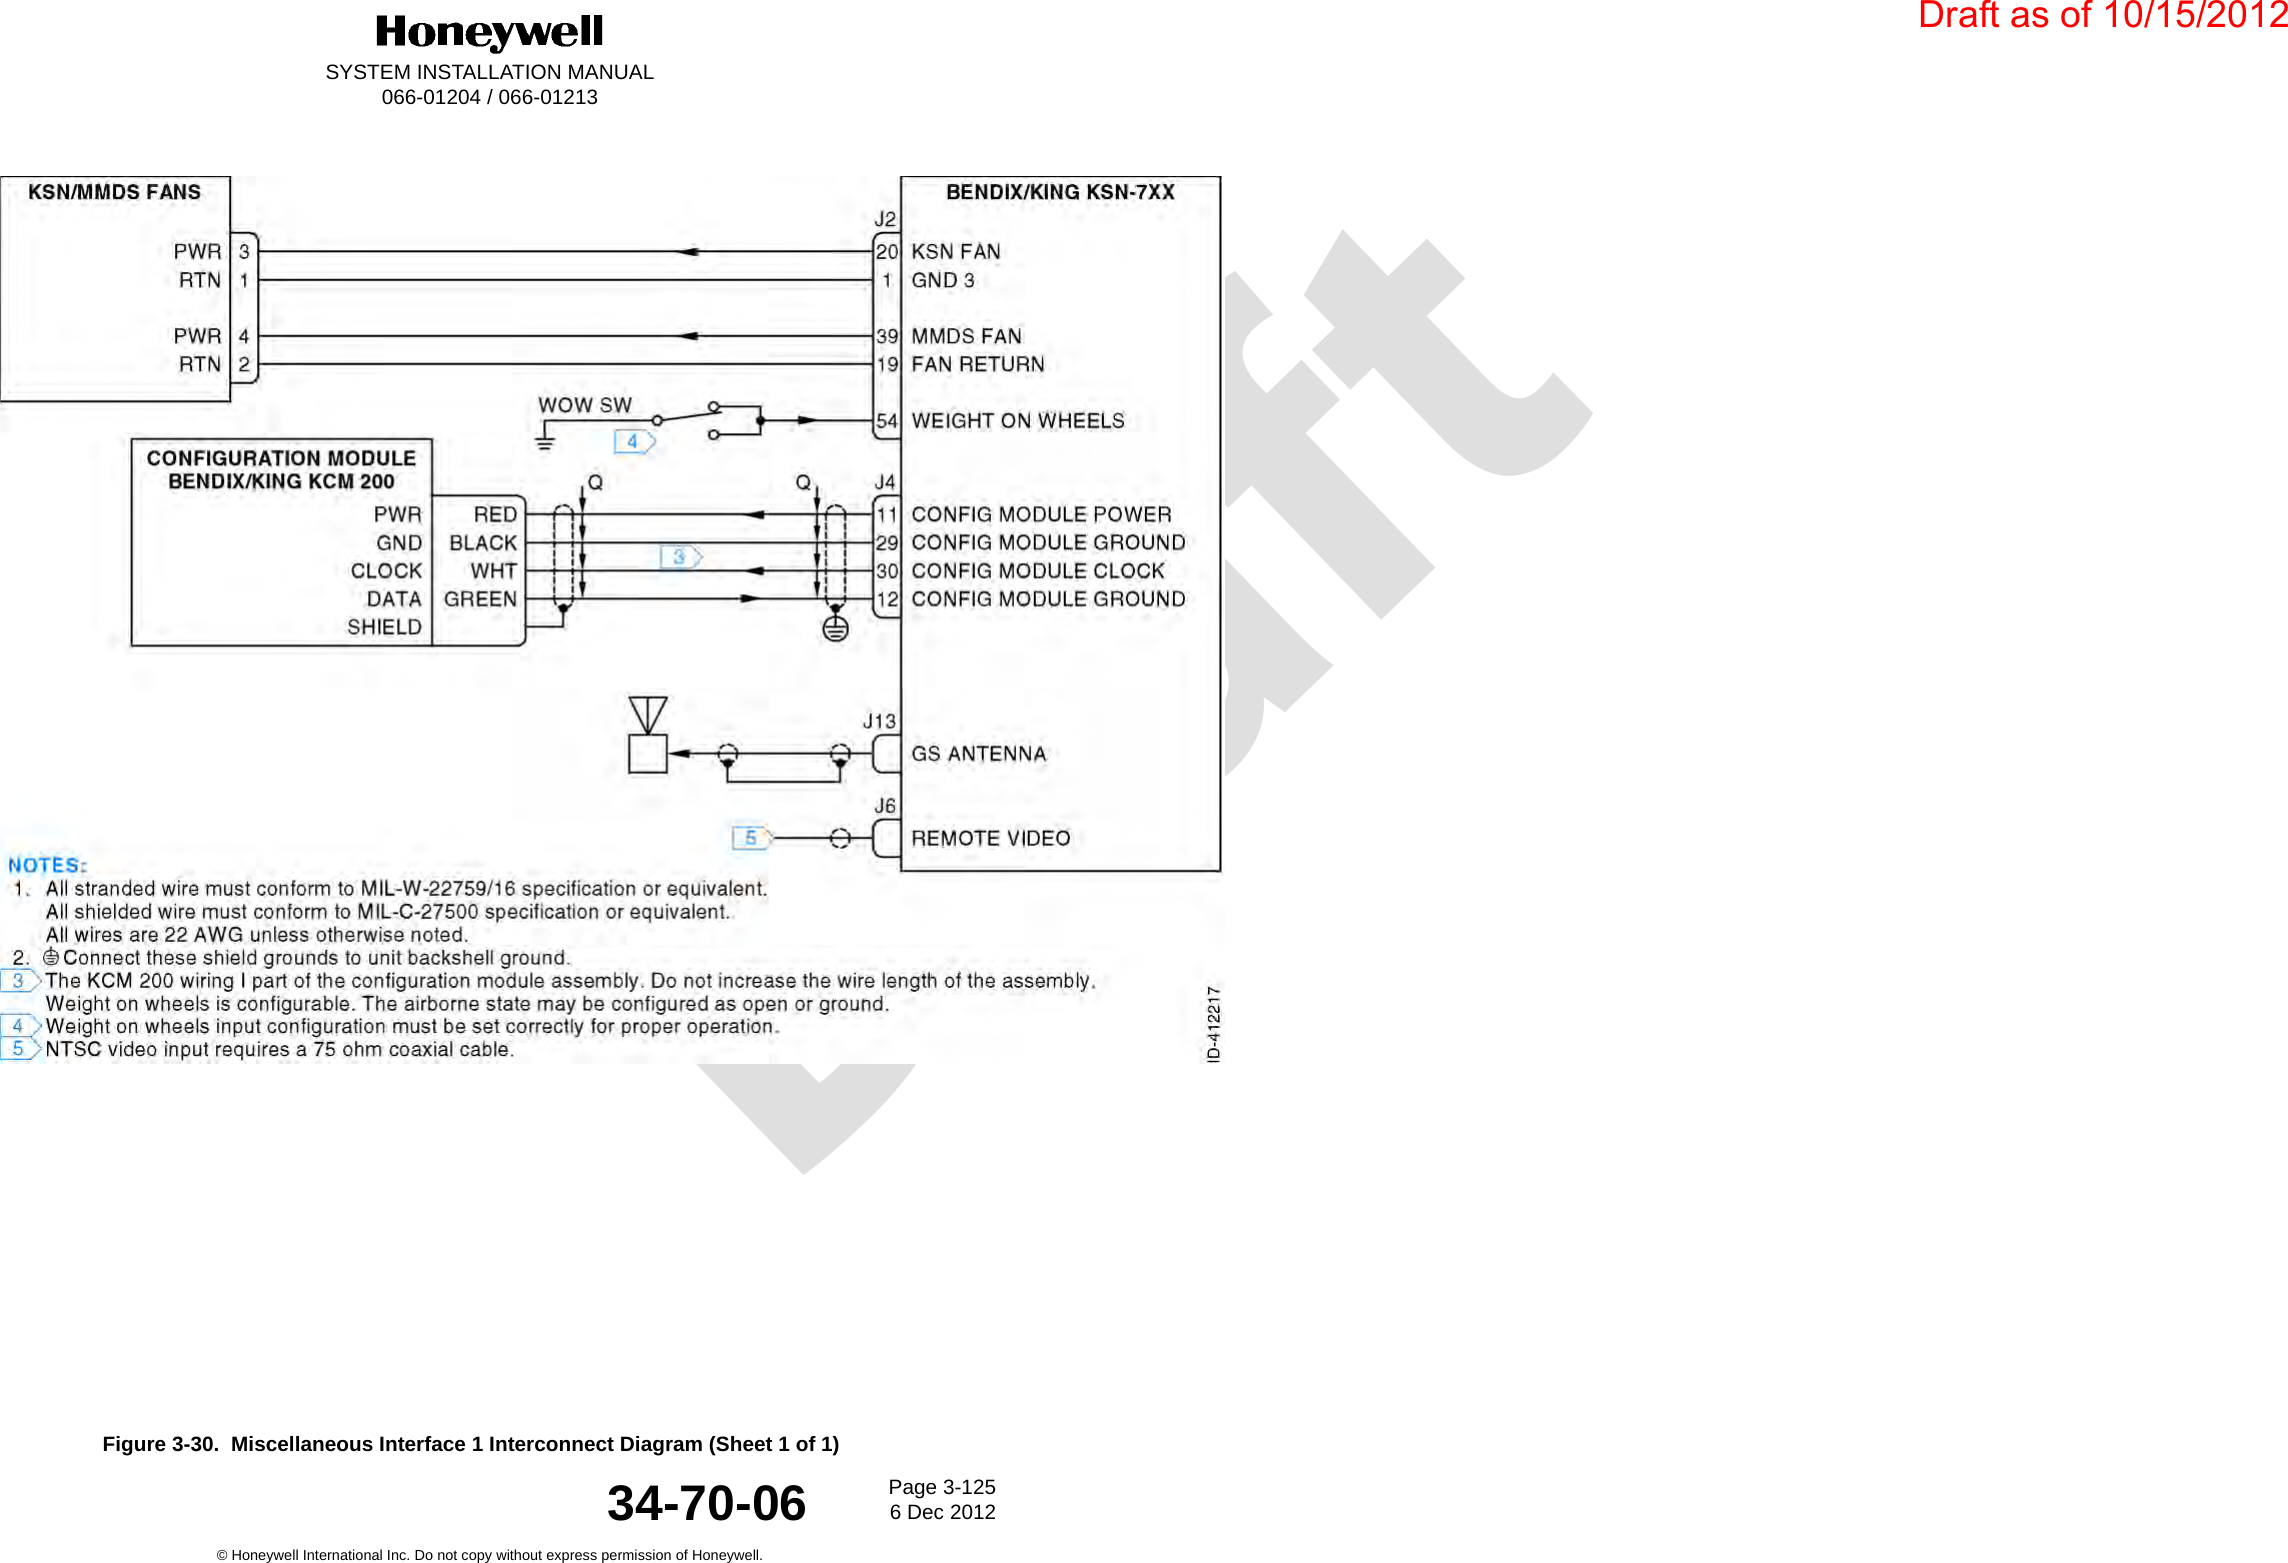 DraftSYSTEM INSTALLATION MANUAL066-01204 / 066-01213Page 3-1256 Dec 2012© Honeywell International Inc. Do not copy without express permission of Honeywell.34-70-06Figure 3-30.  Miscellaneous Interface 1 Interconnect Diagram (Sheet 1 of 1)Draft as of 10/15/2012